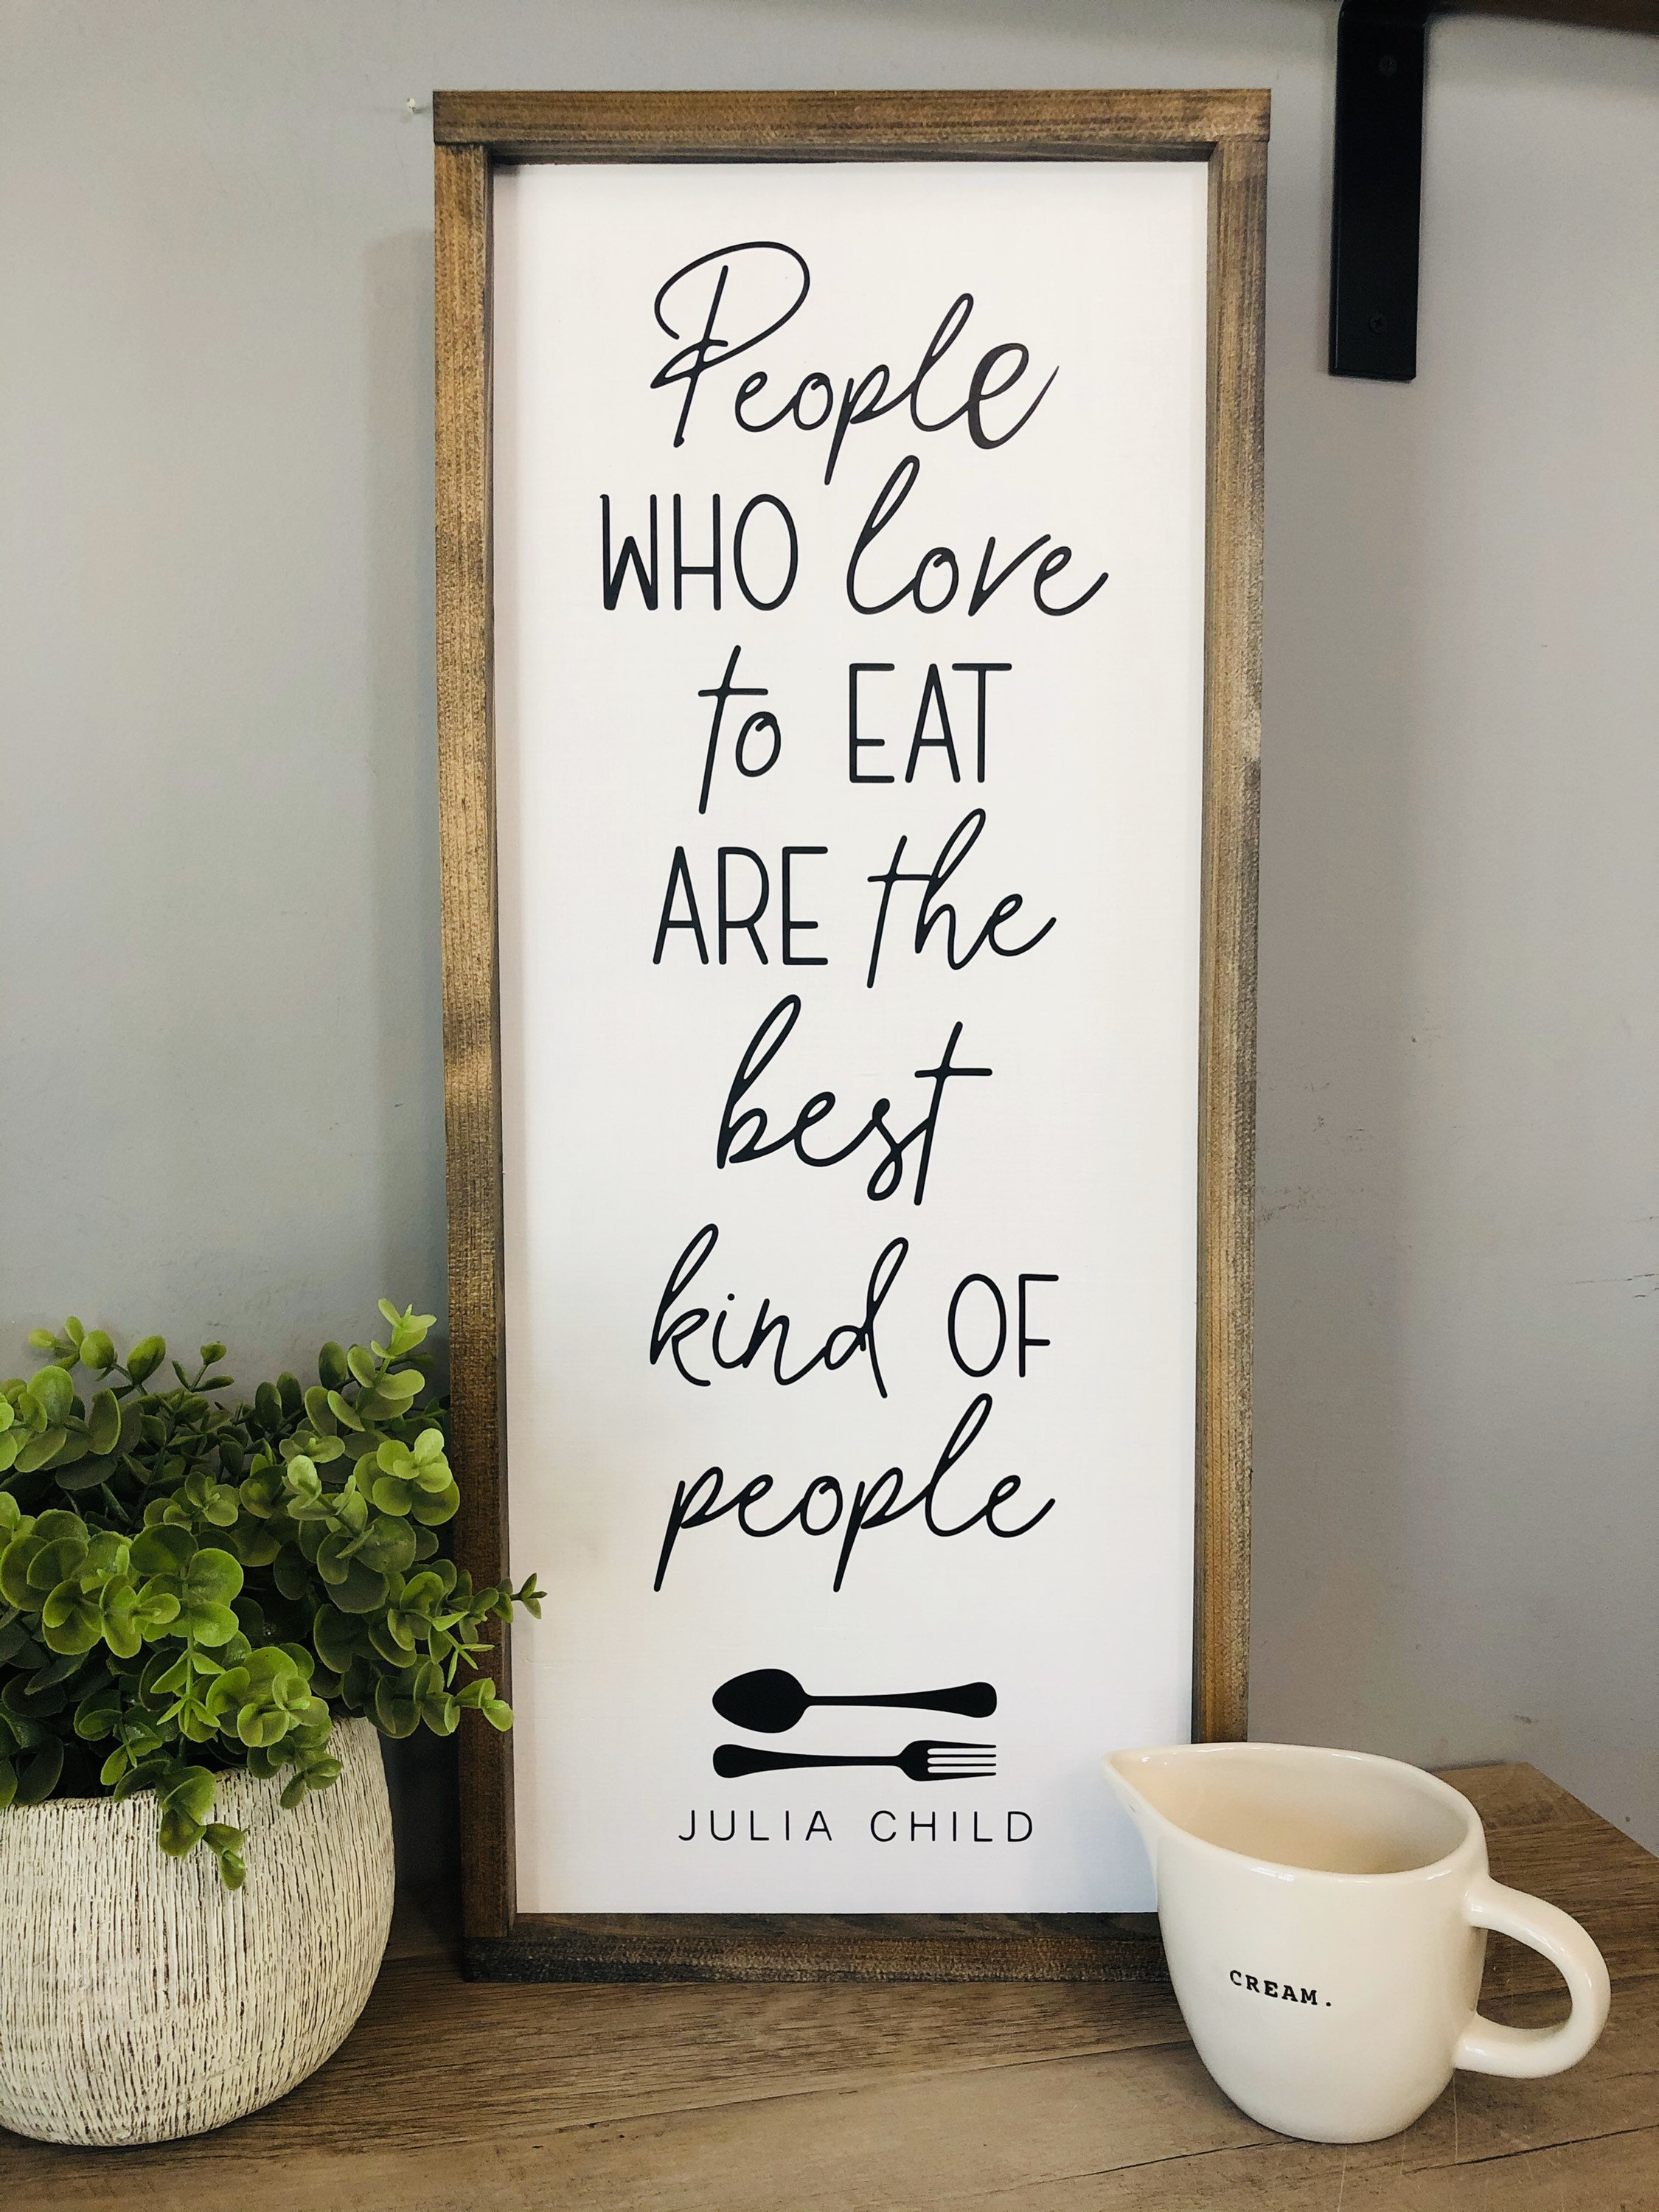 of - Best Kitchen Wood Decor Love Kitchen Eat Sign Are to People Kind Wall Child Who People Farmhouse the Decor Julia Etsy Framed